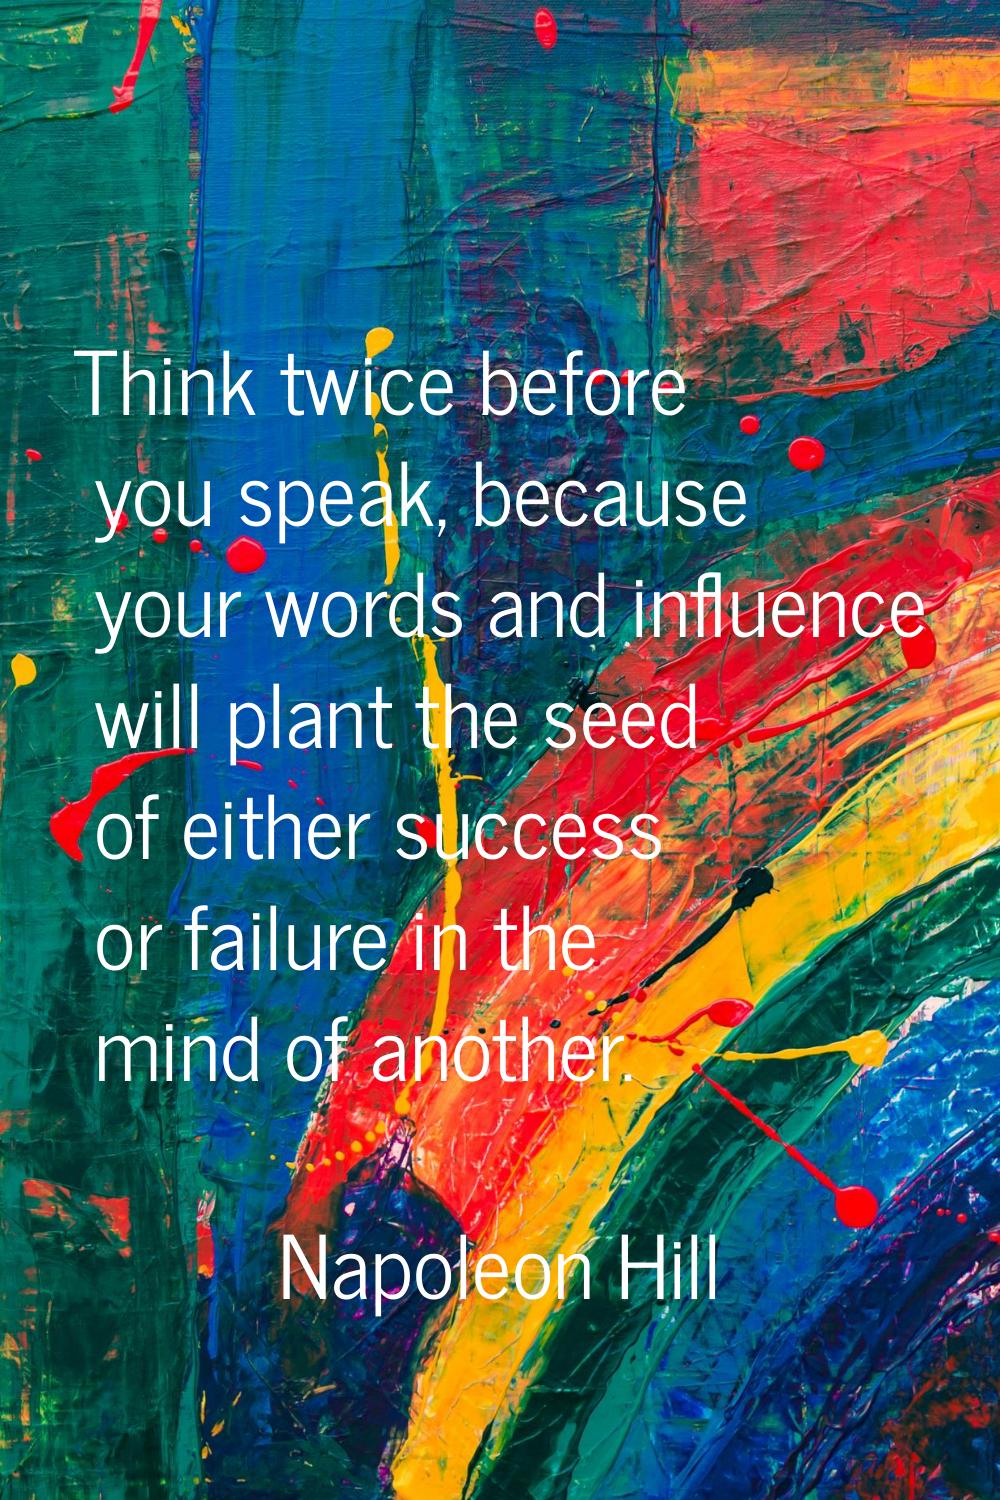 Think twice before you speak, because your words and influence will plant the seed of either succes